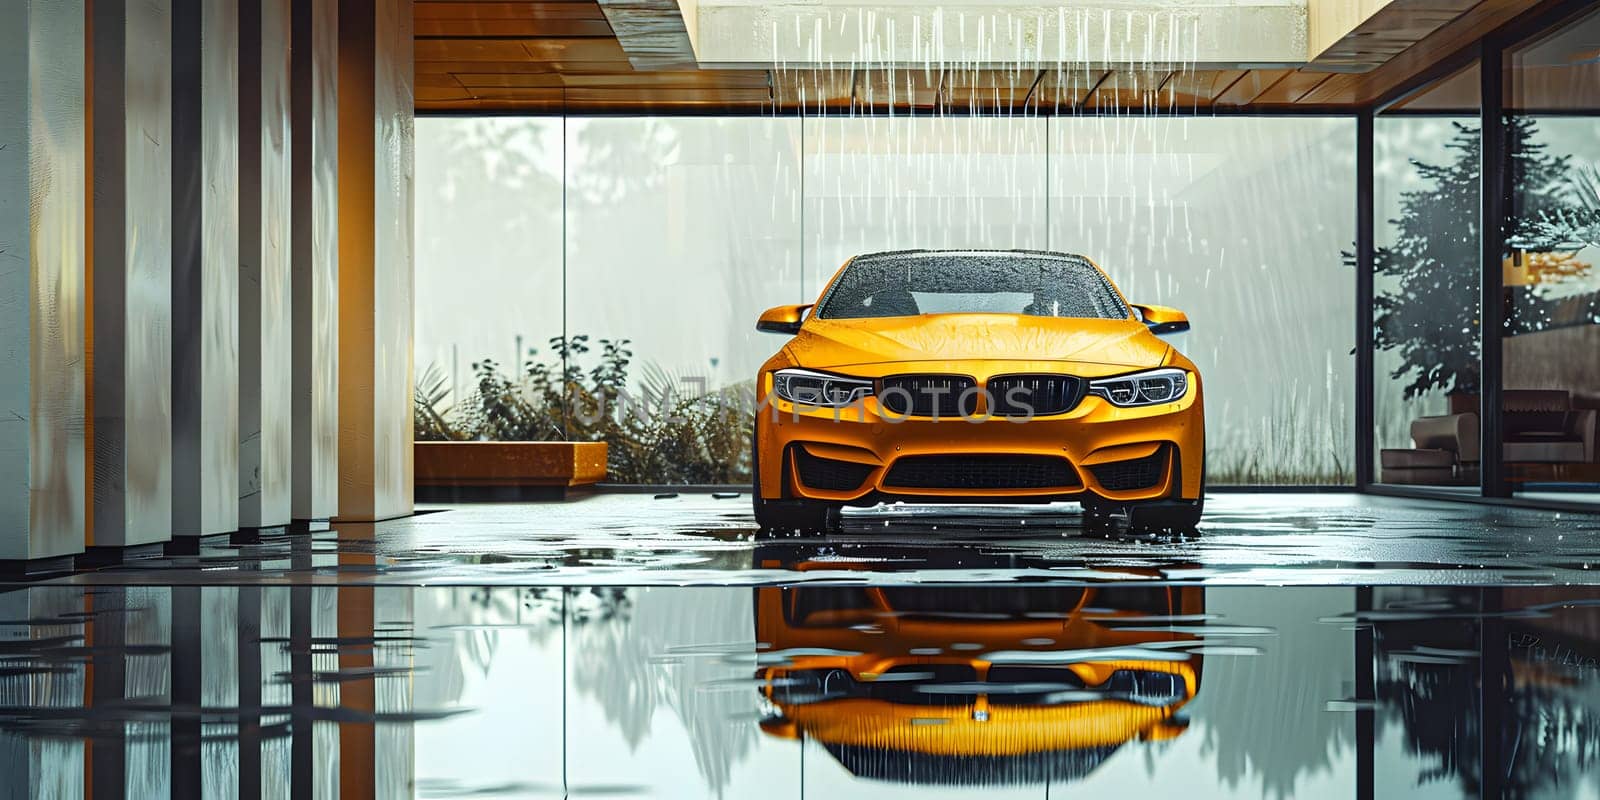 Yellow BMW M4 parked in garage with automotive lighting and sleek design by Nadtochiy